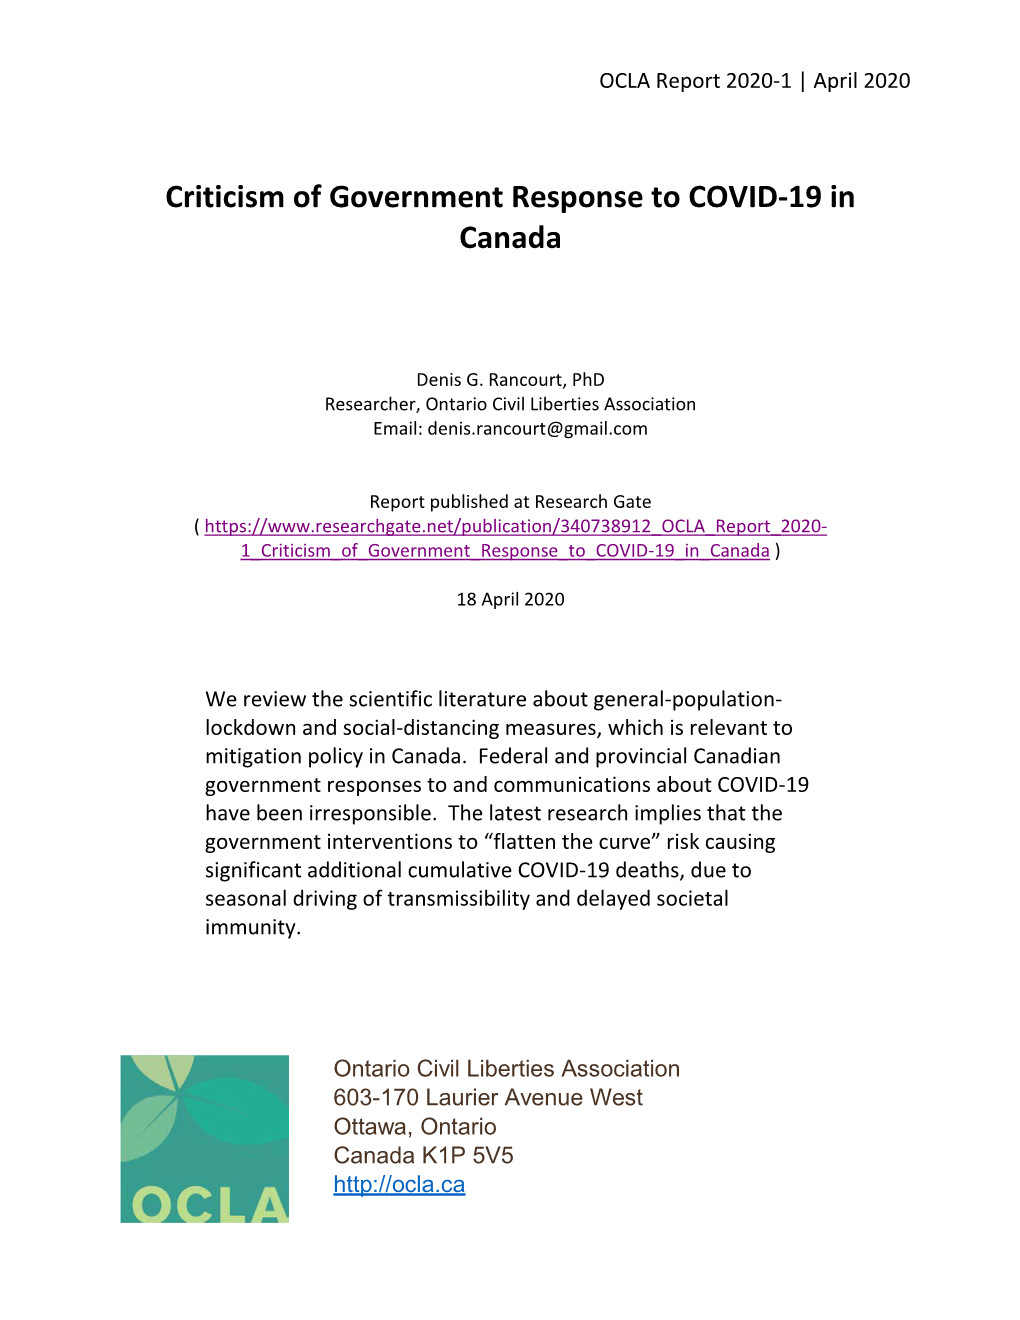 Criticism of Government Response to COVID-19 in Canada